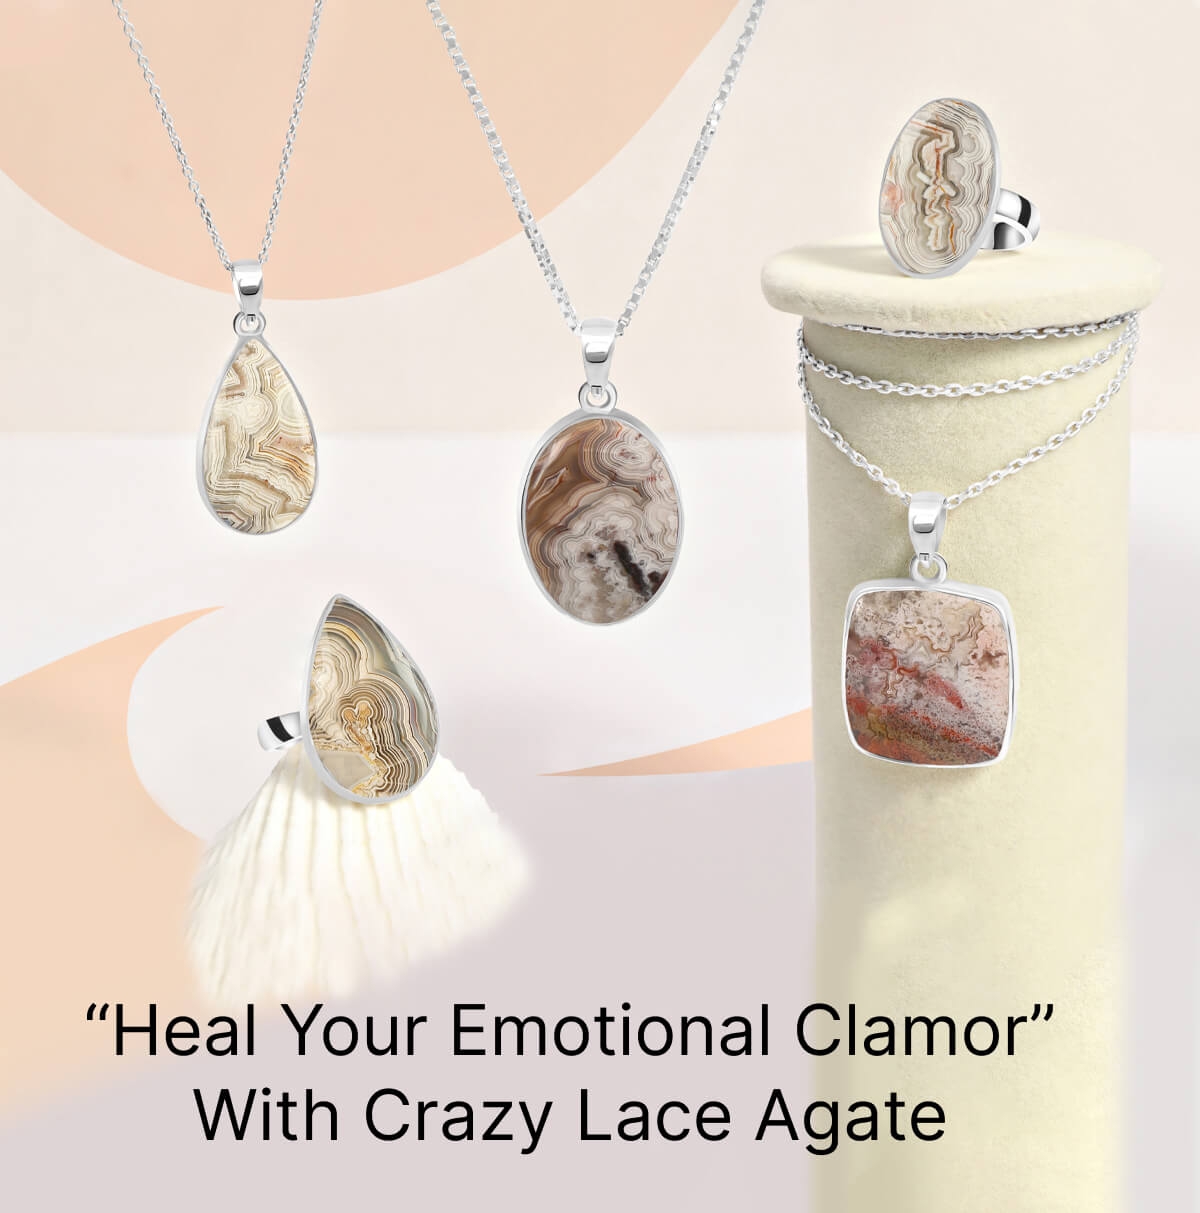 Healing Properties & Benefits Of Crazy Lace Agate